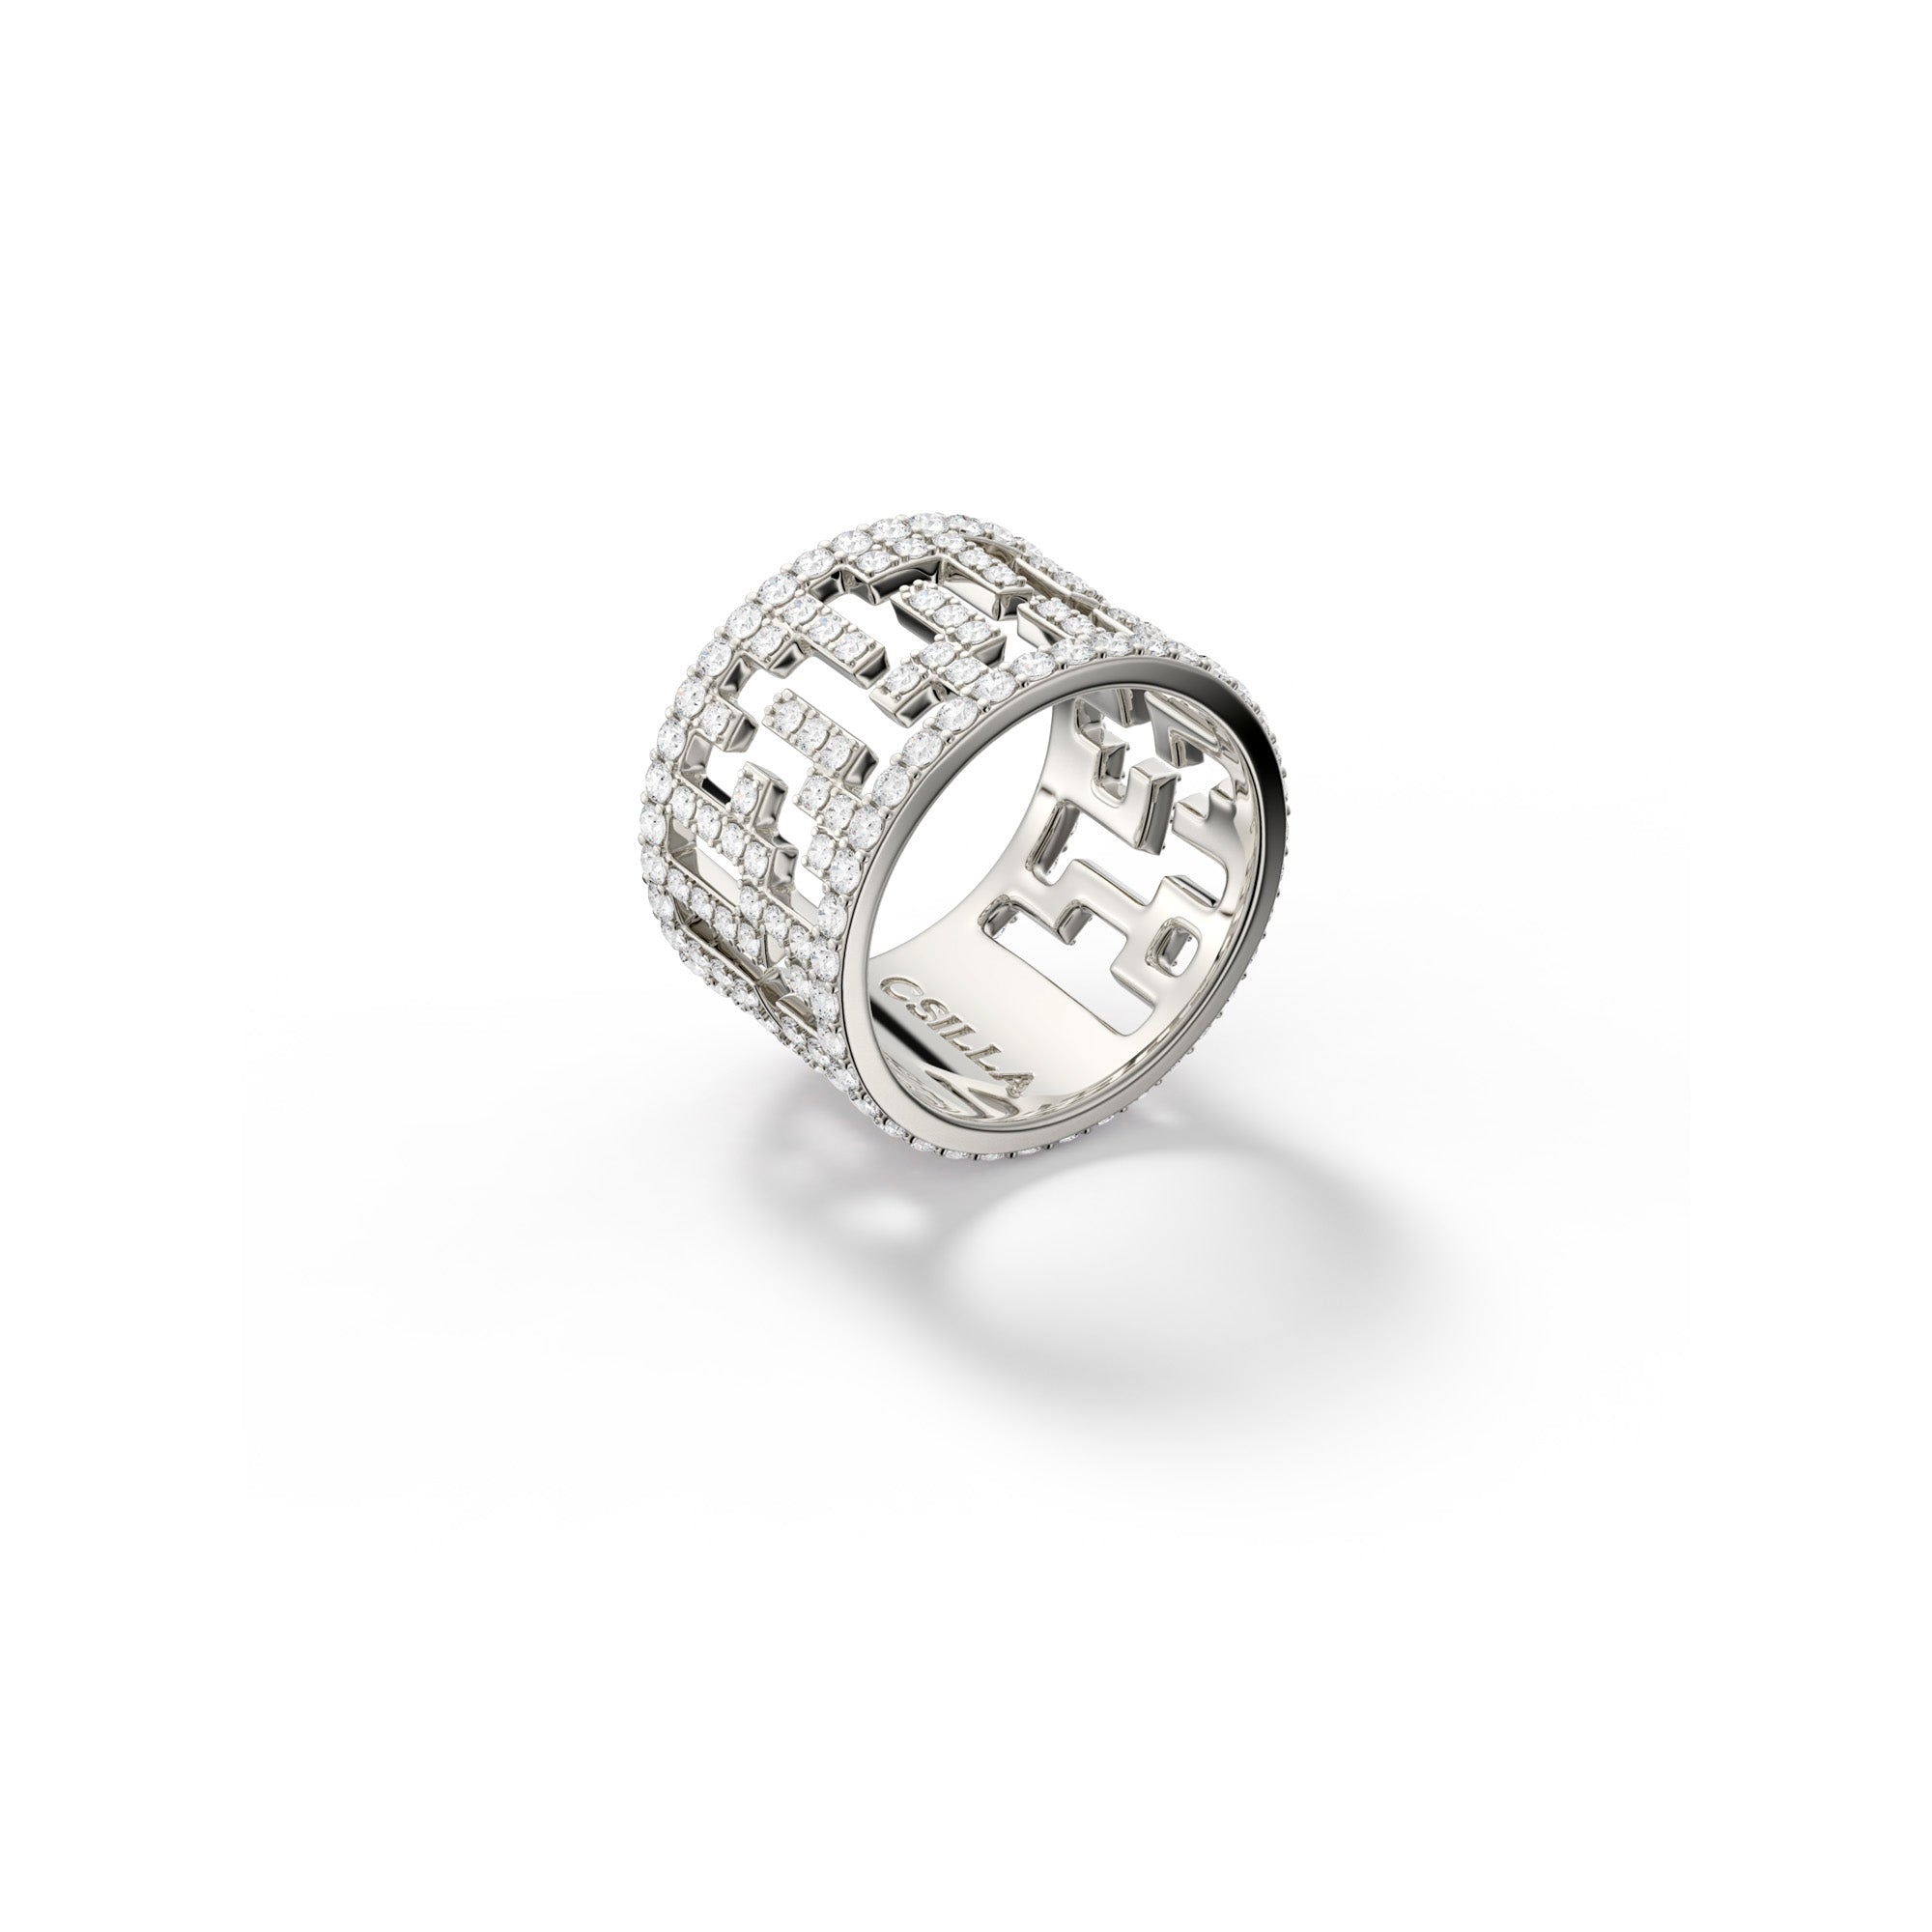 'A-Māz-Me' Icy Large White Gold Ring with Diamonds